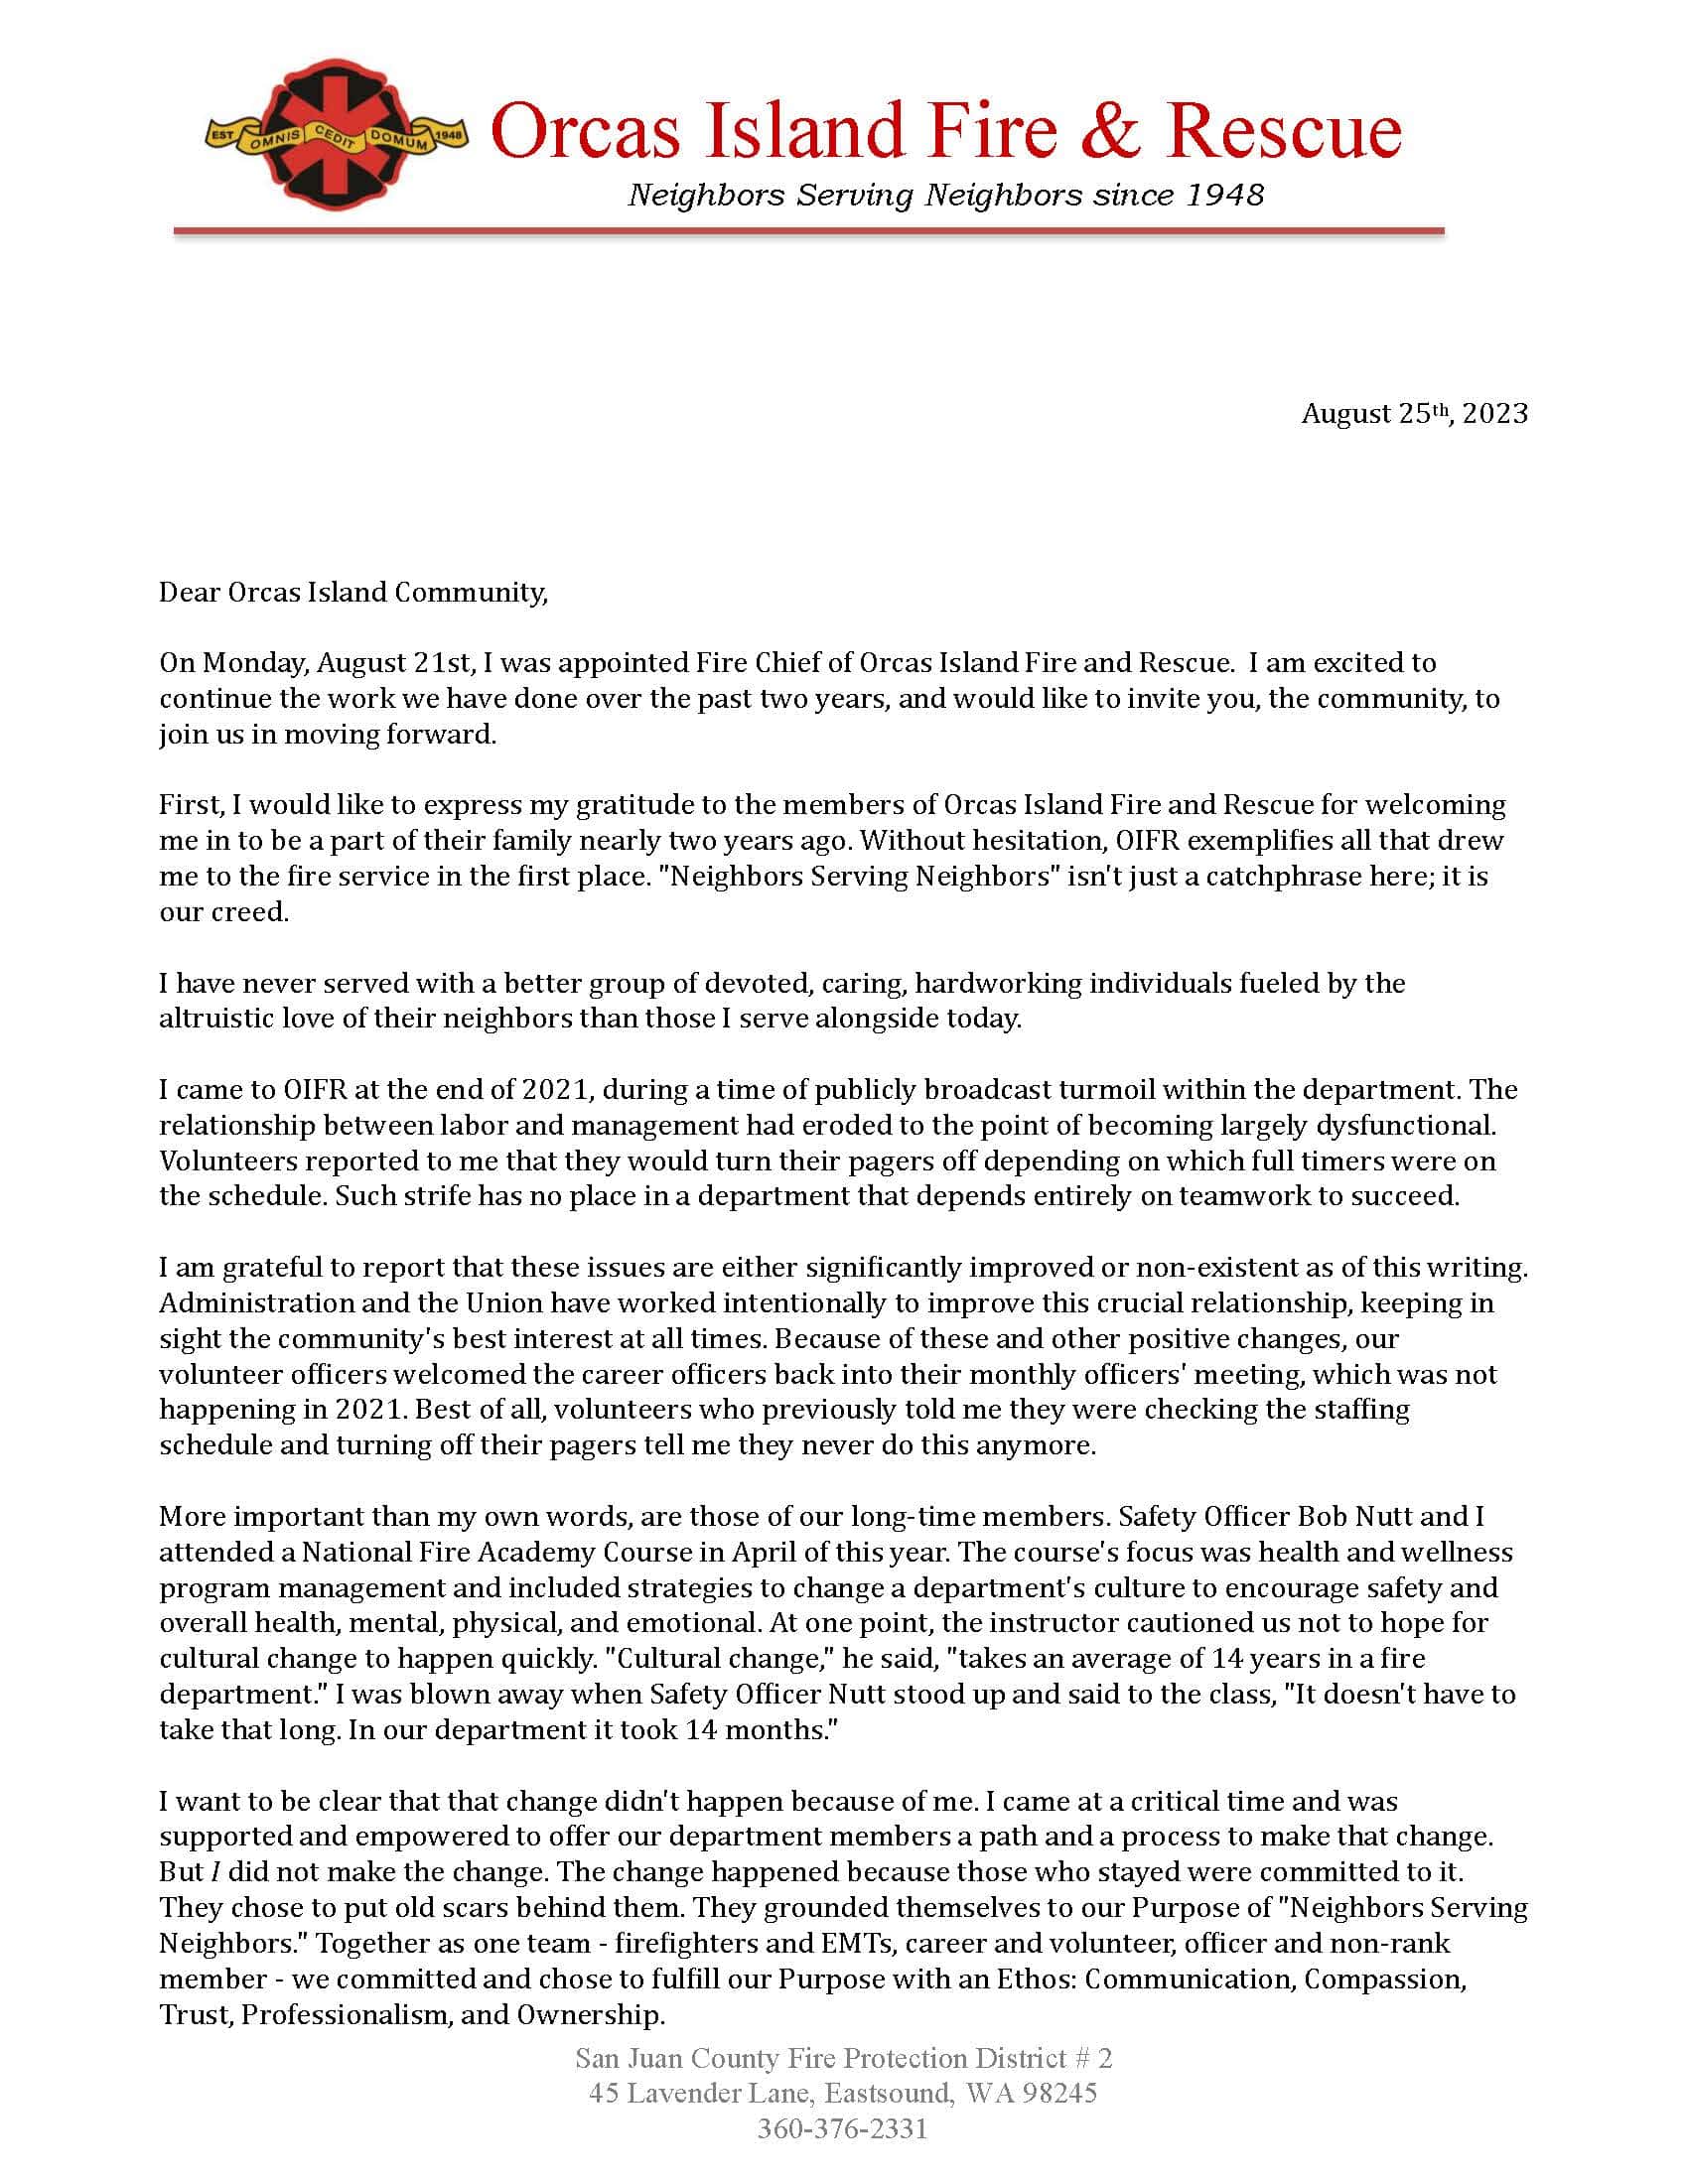 2023-08-25 Open Letter_Page_1